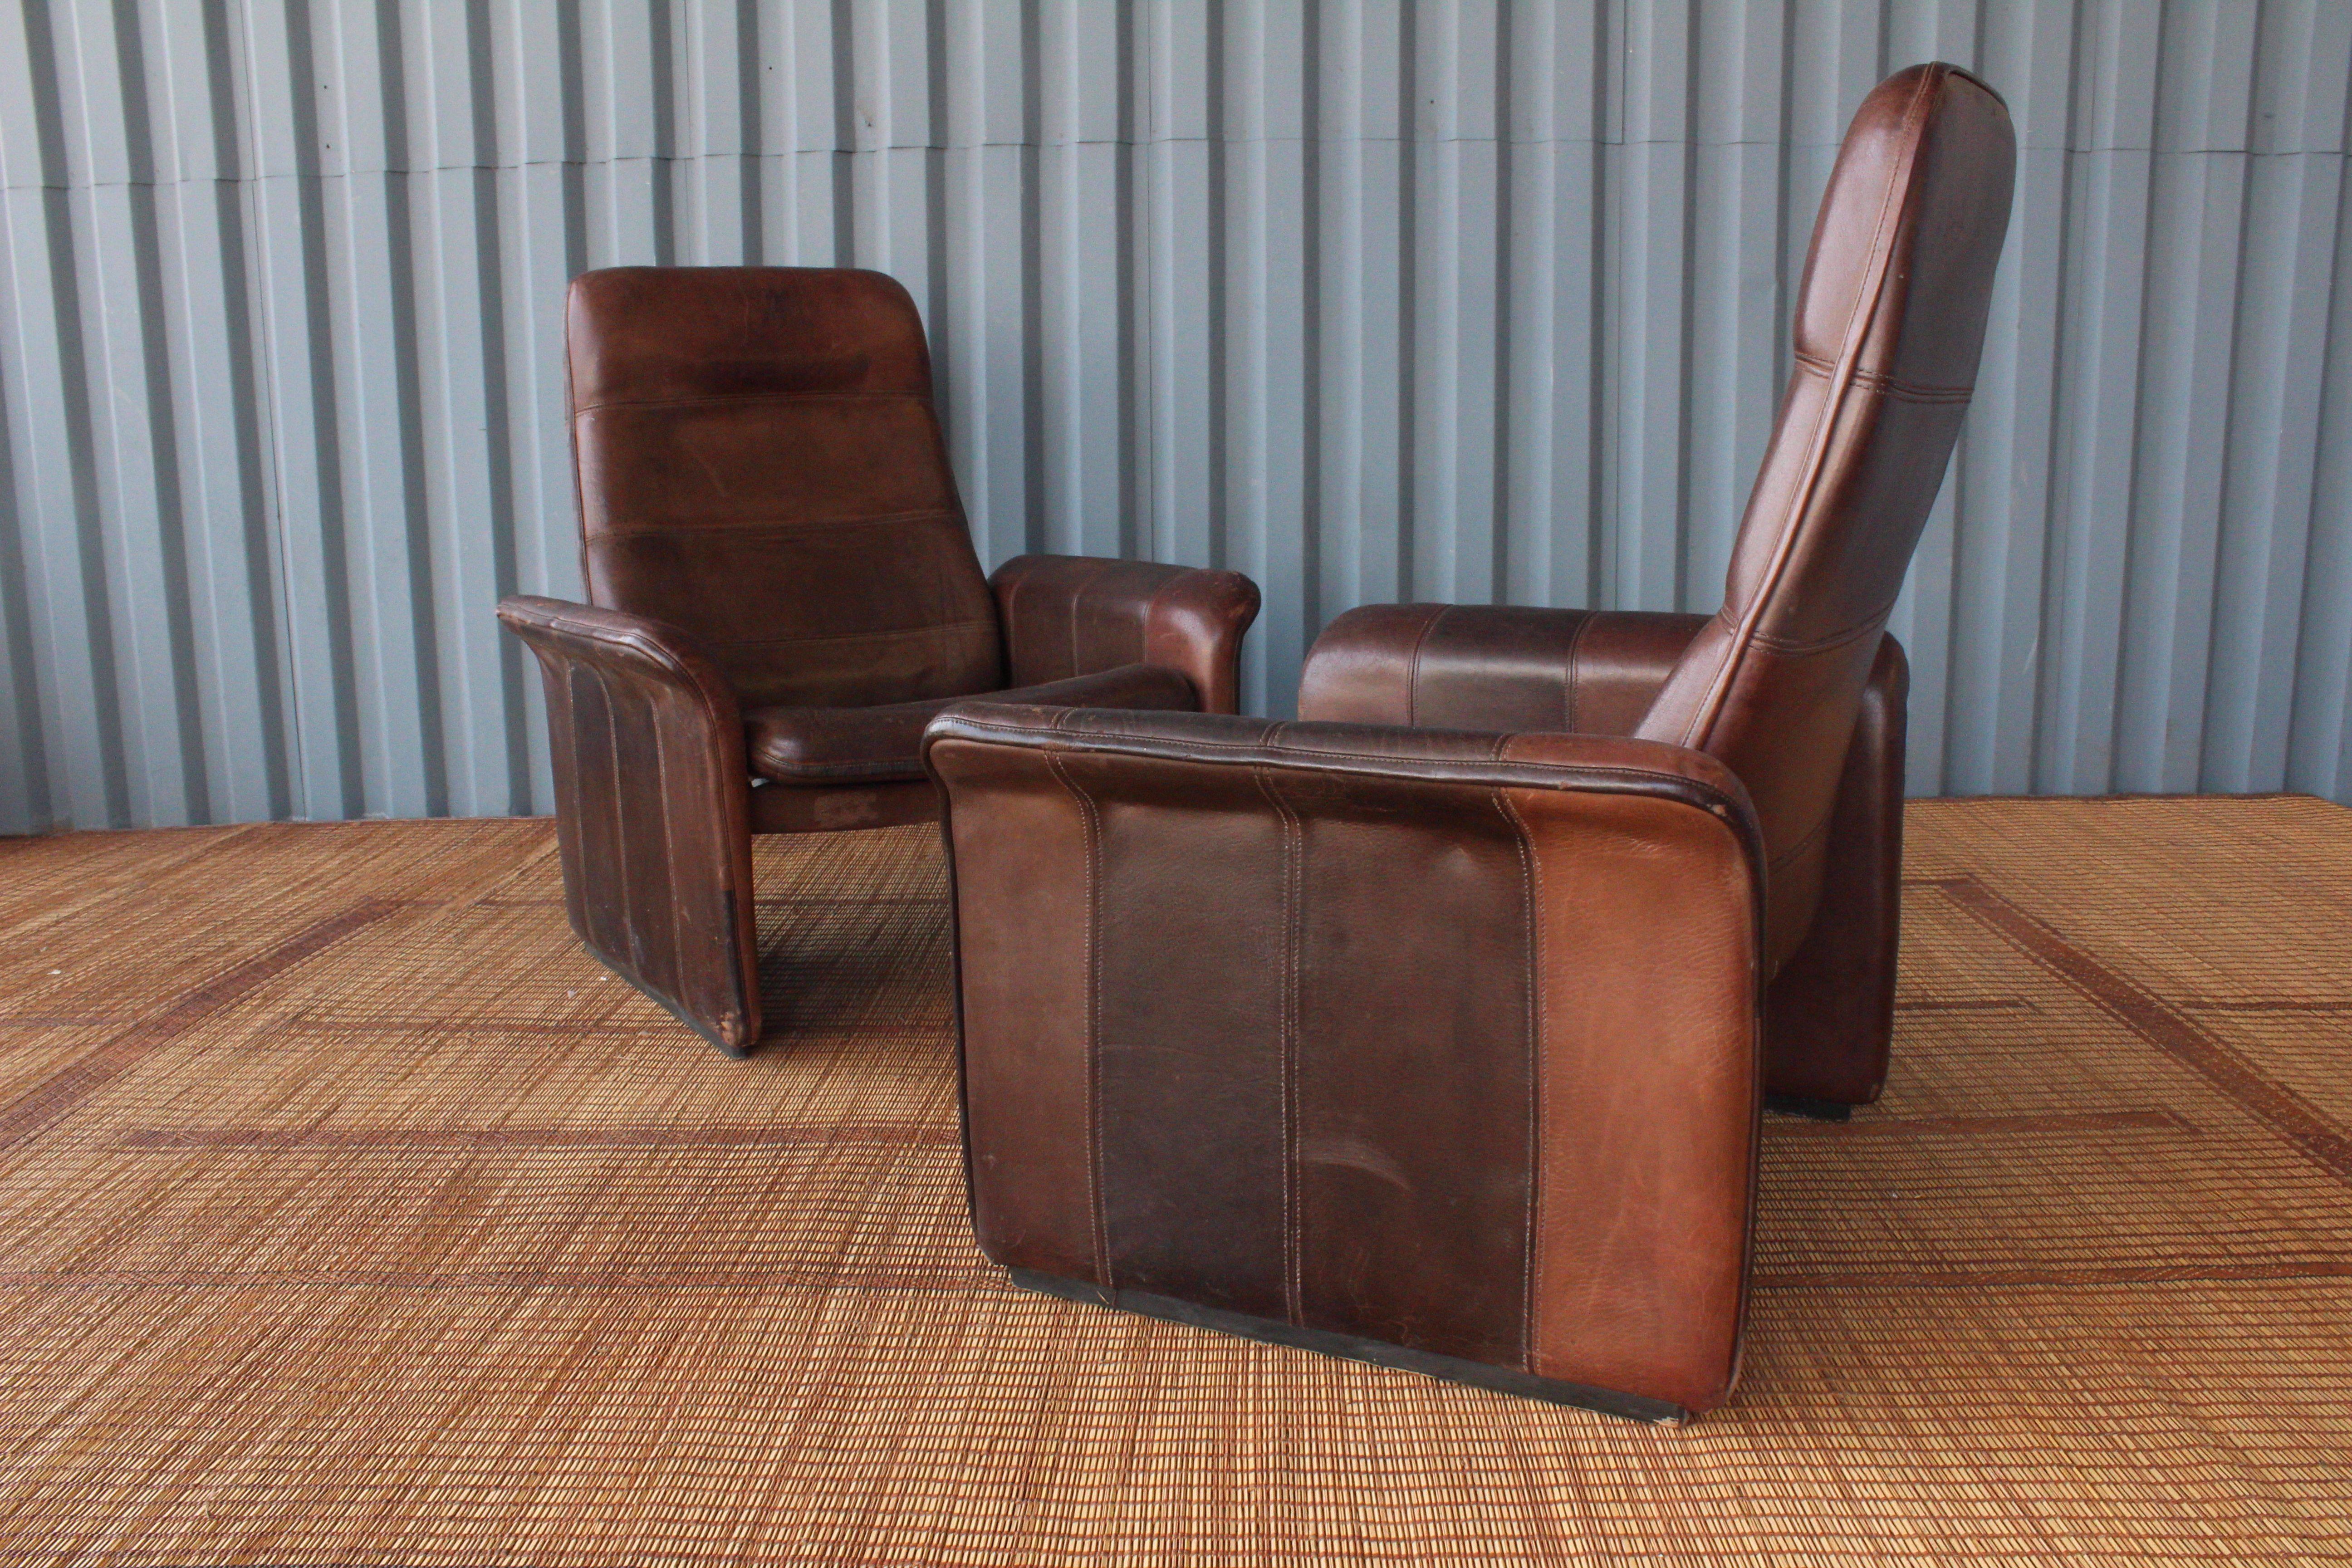 Pair of reclining DS-50 chairs by De Sede, Switzerland, circa 1970s. Rich buffalo neck leather with a beautifully aged patina. Professionally reconditioned.
  